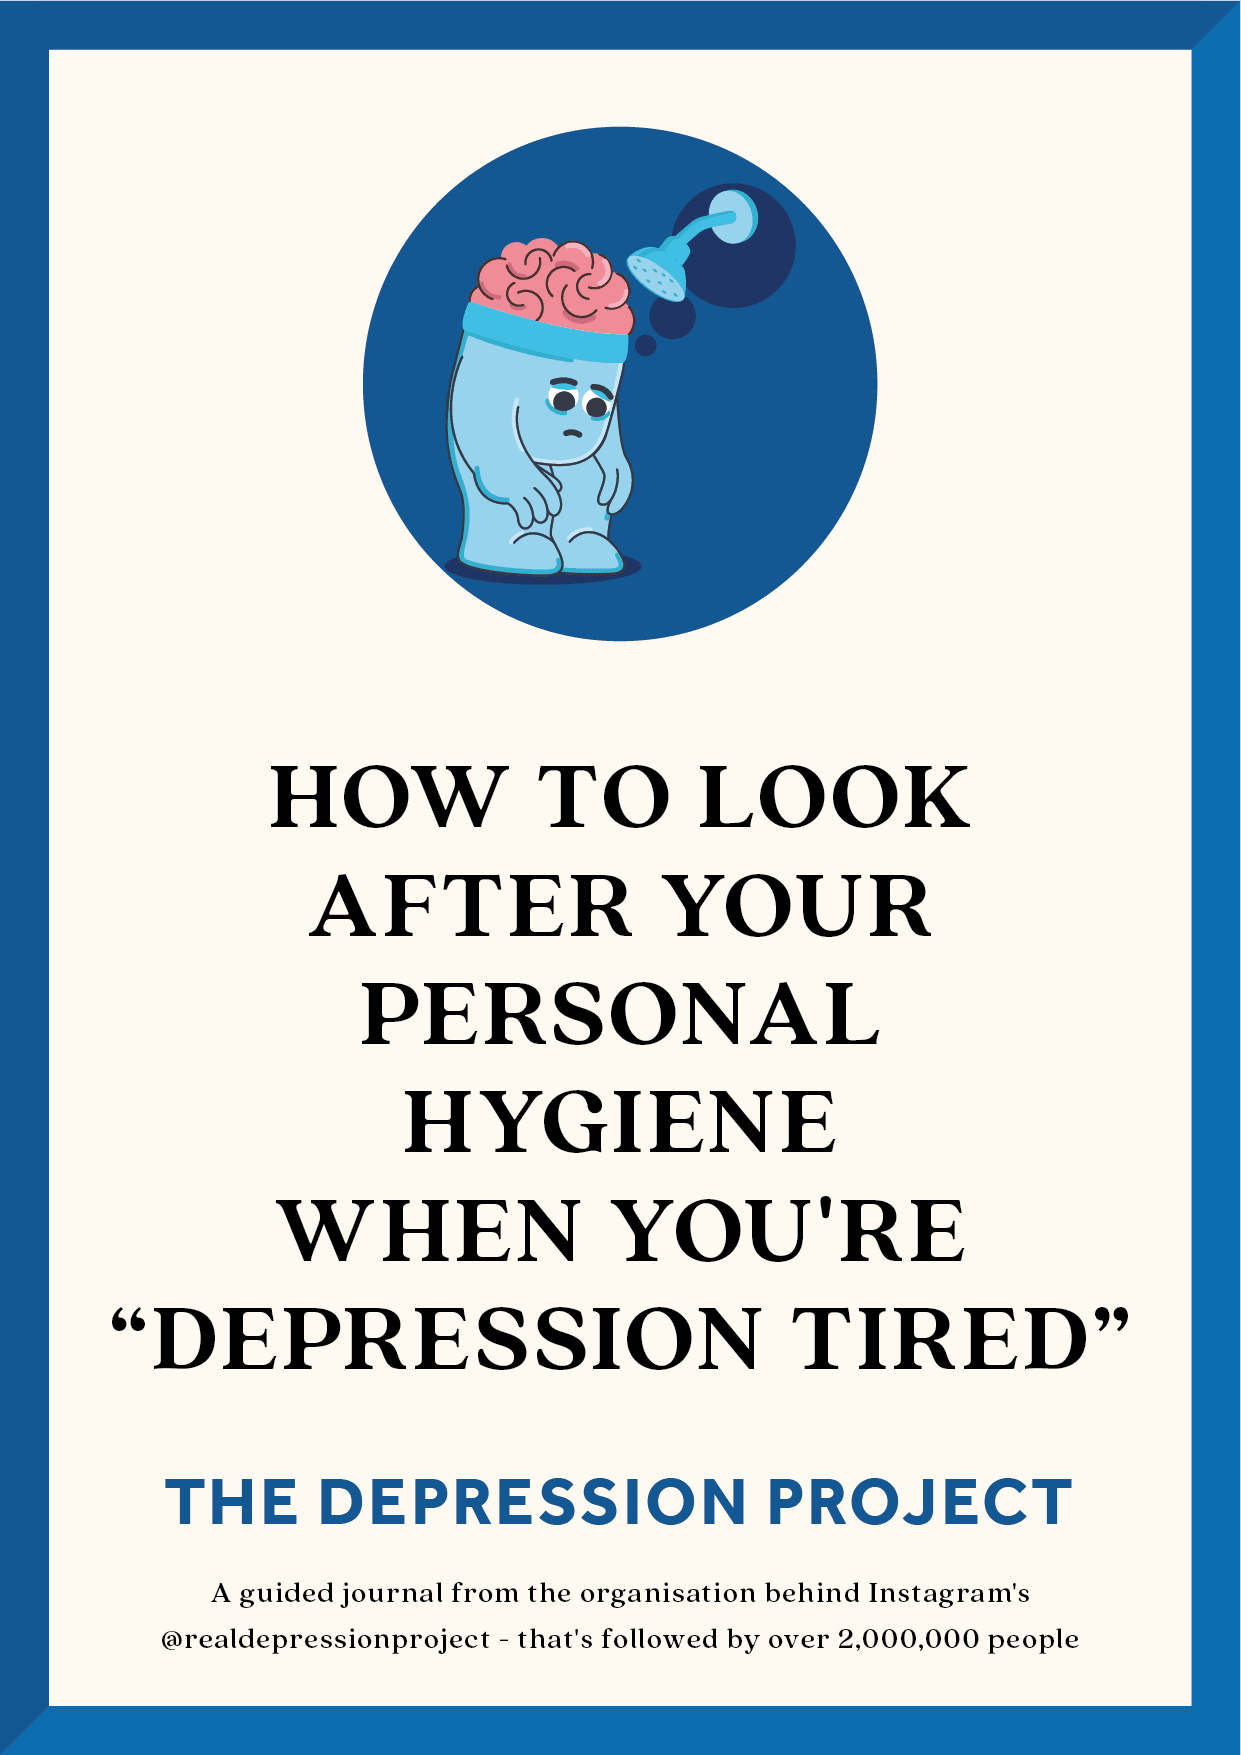 How To Look After Your Personal Hygiene When You're "Depression Tired" - The Depression Project